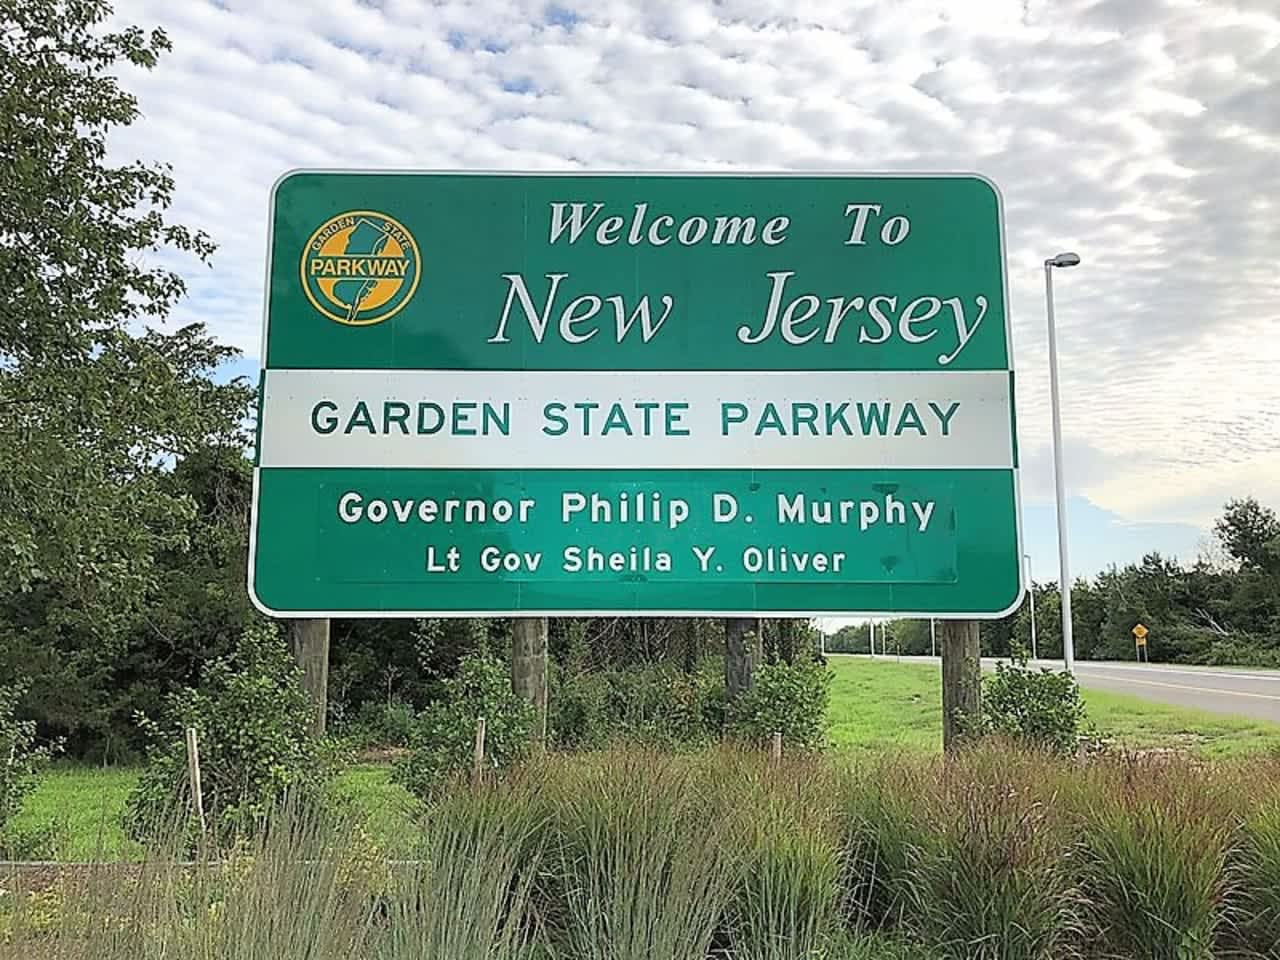 Welcome to NJ